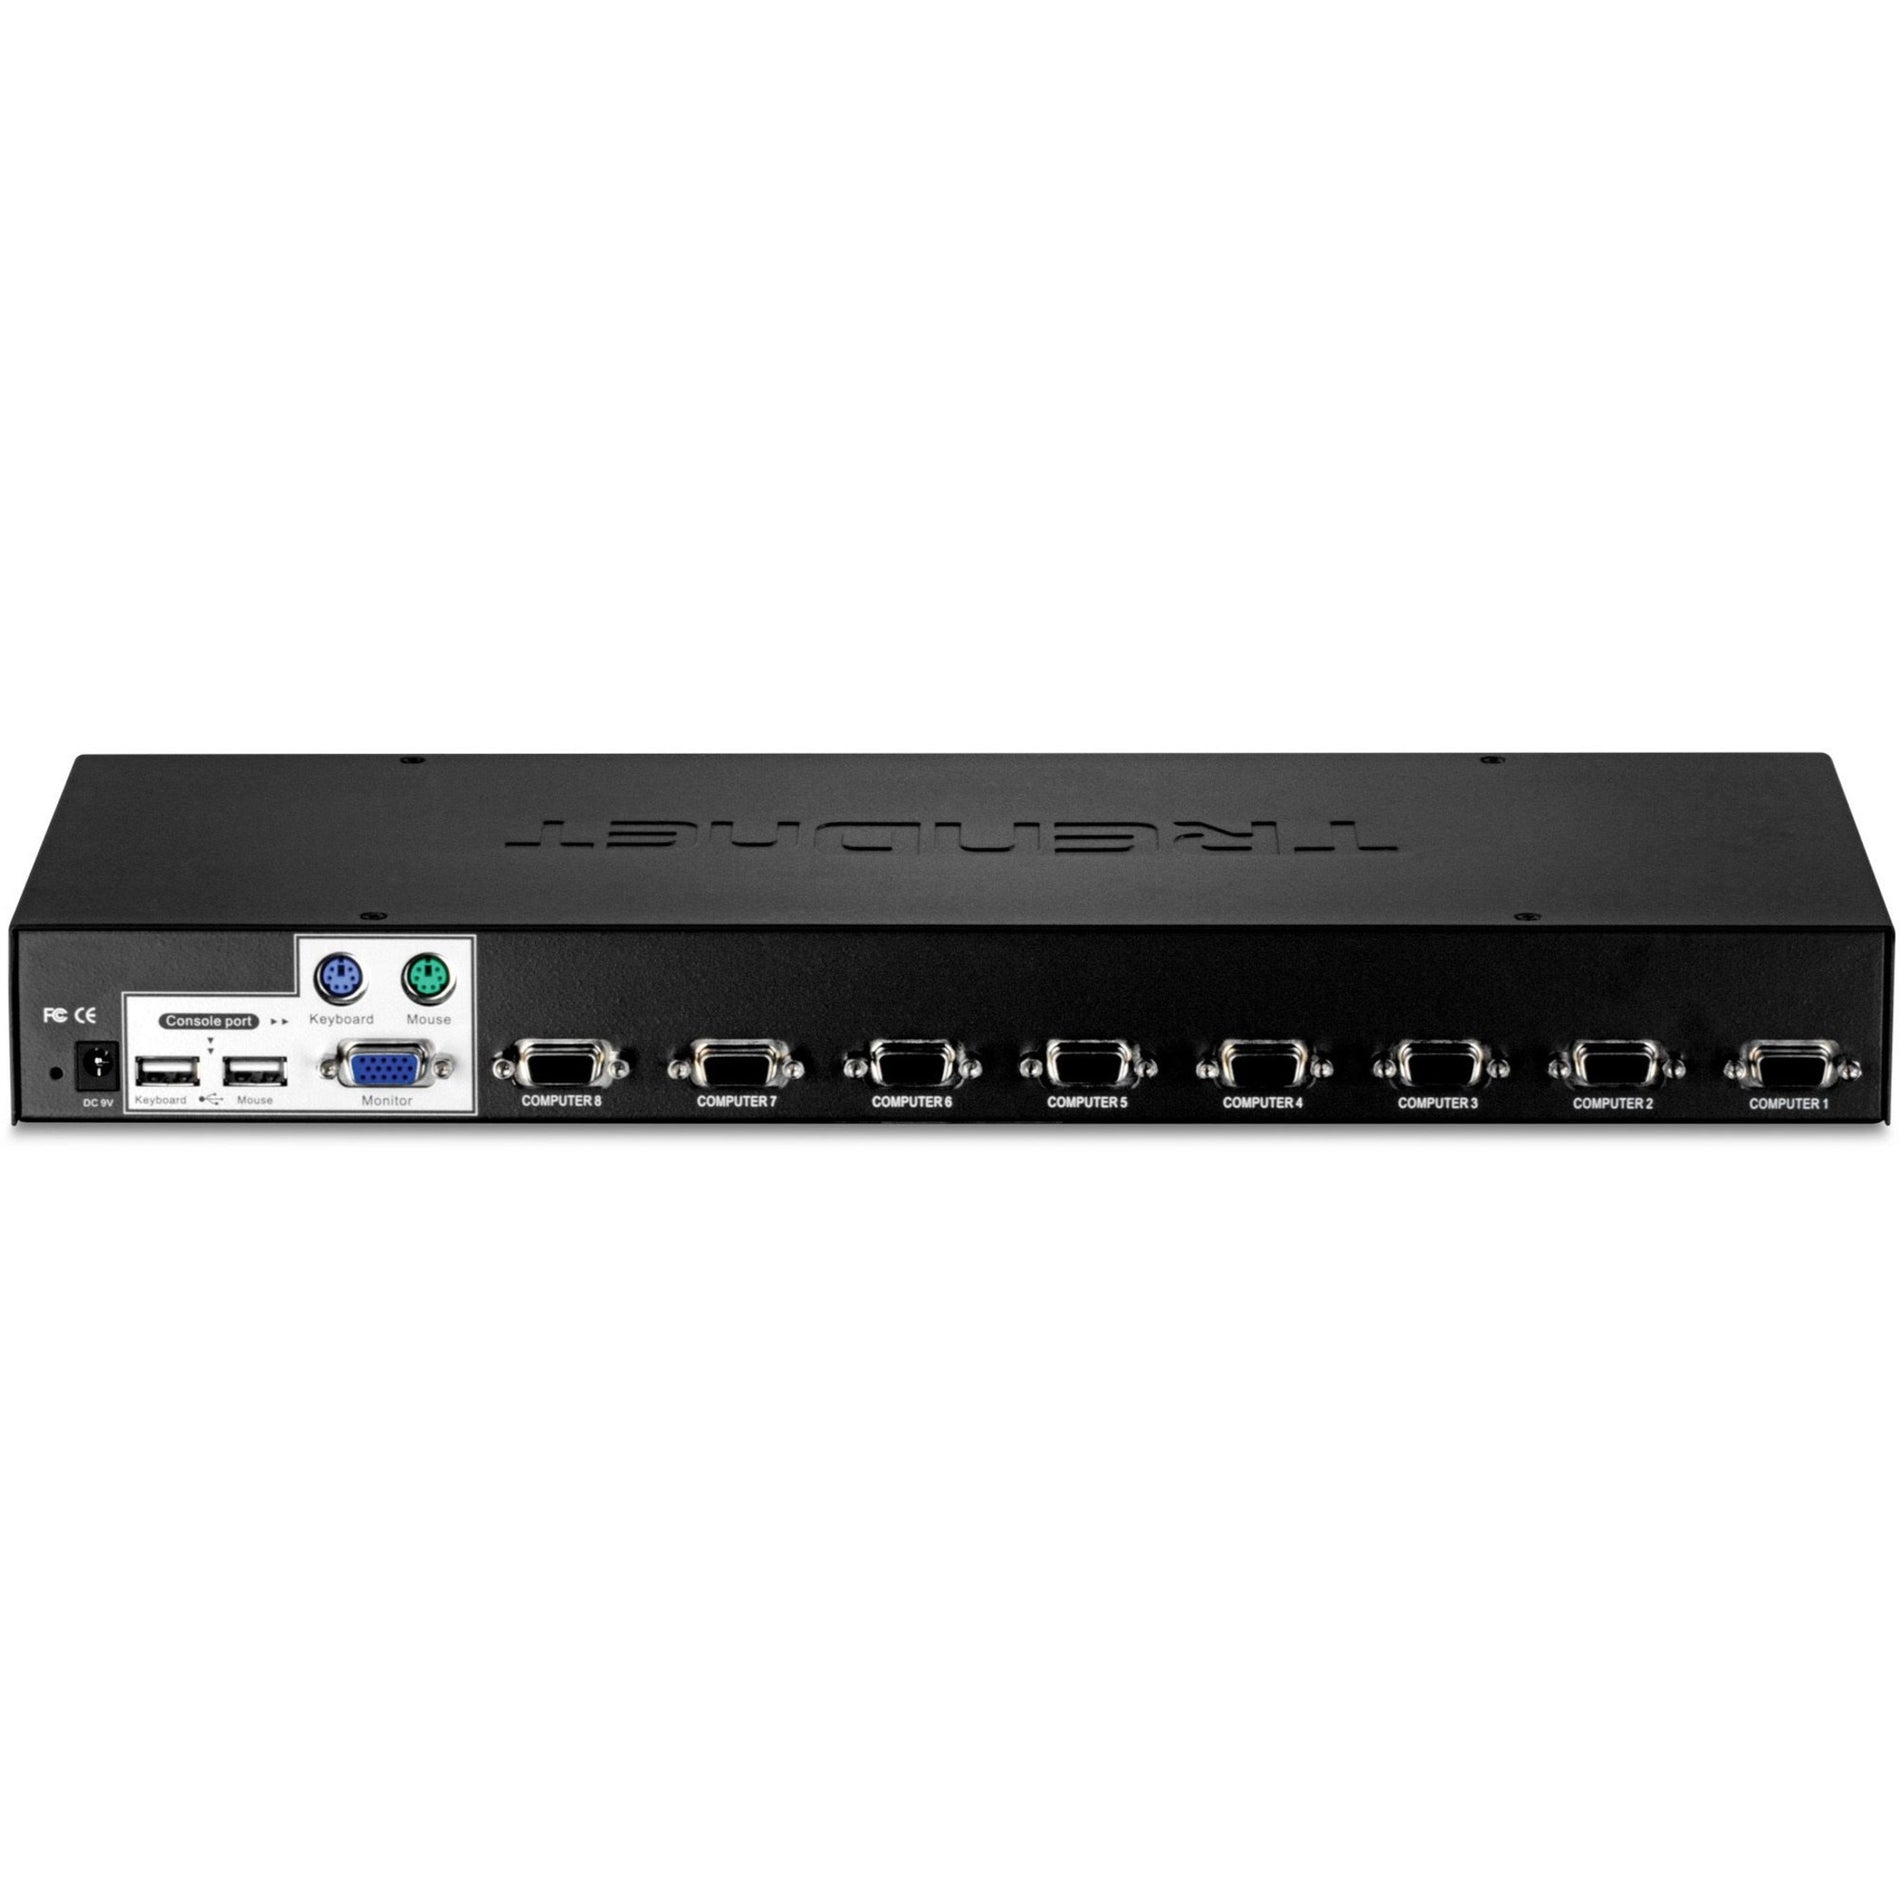 TRENDnet TK-803R 8-Port Rackmount KVM Switch, VGA & USB Connection, Device Monitoring, Auto Scan, Control up to 8 Computers/Servers